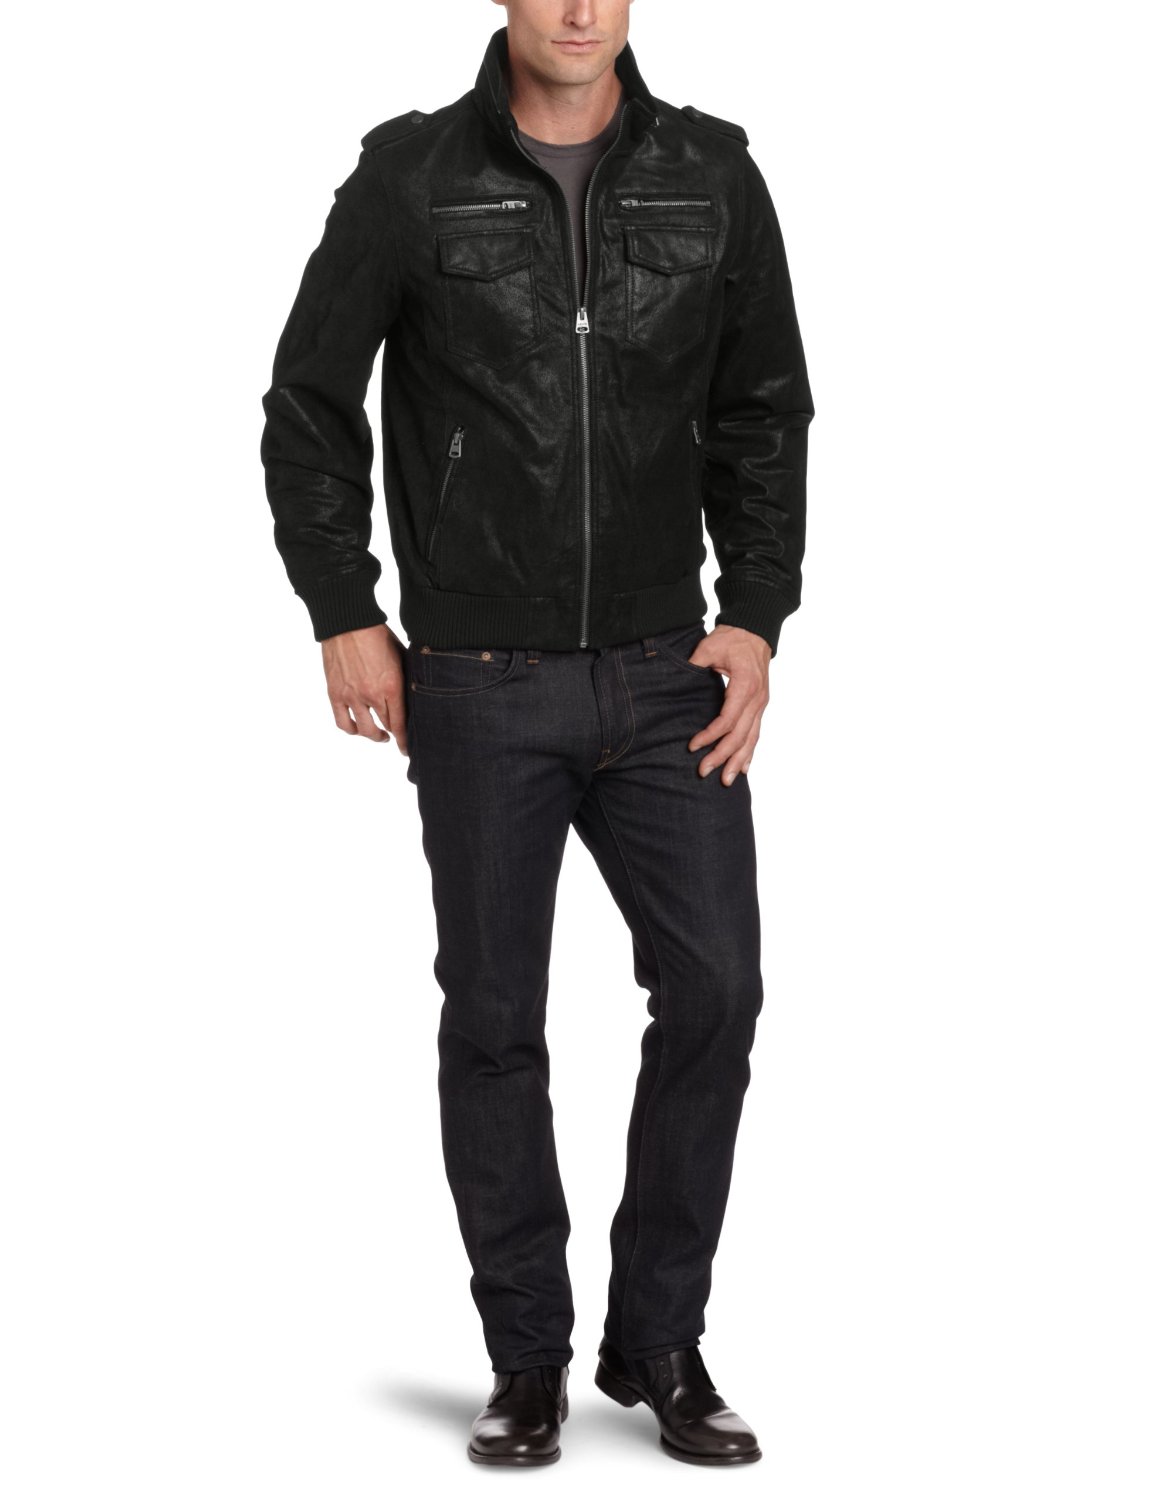 Download this Levis Mens Leather... picture